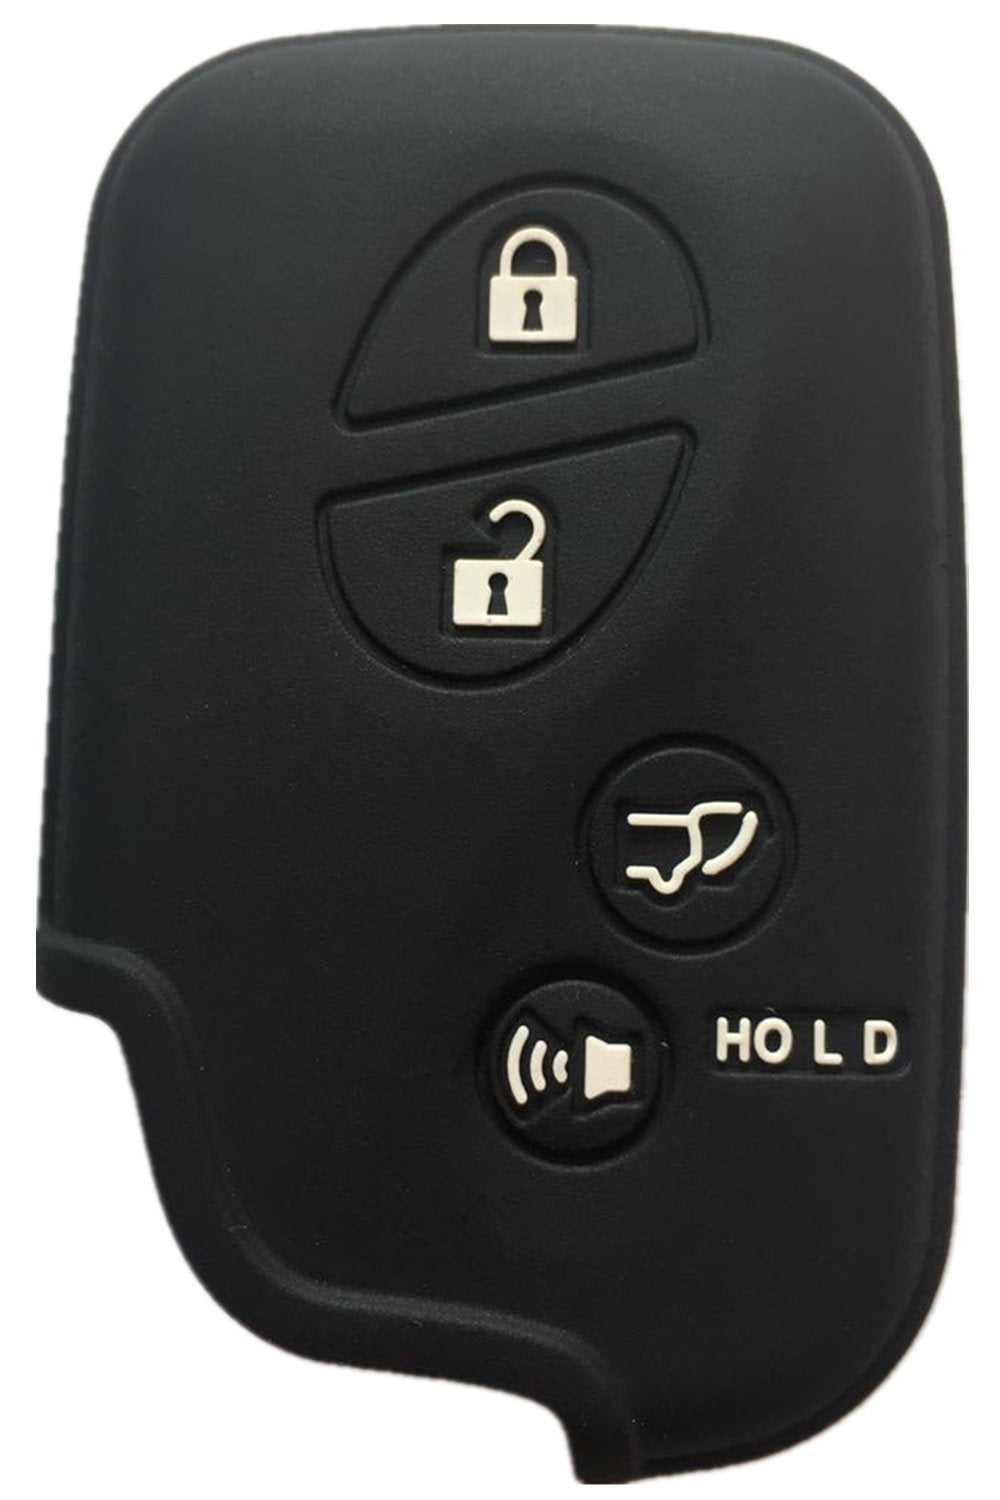  [AUSTRALIA] - Rpkey Silicone Keyless Entry Remote Control Key Fob Cover Case protector For Lexus ES350 GS300 GS350 GS430 GS450h ISC IS250 IS350 LS460 LS600h HYQ14AAB 89904-50380 89904-30270